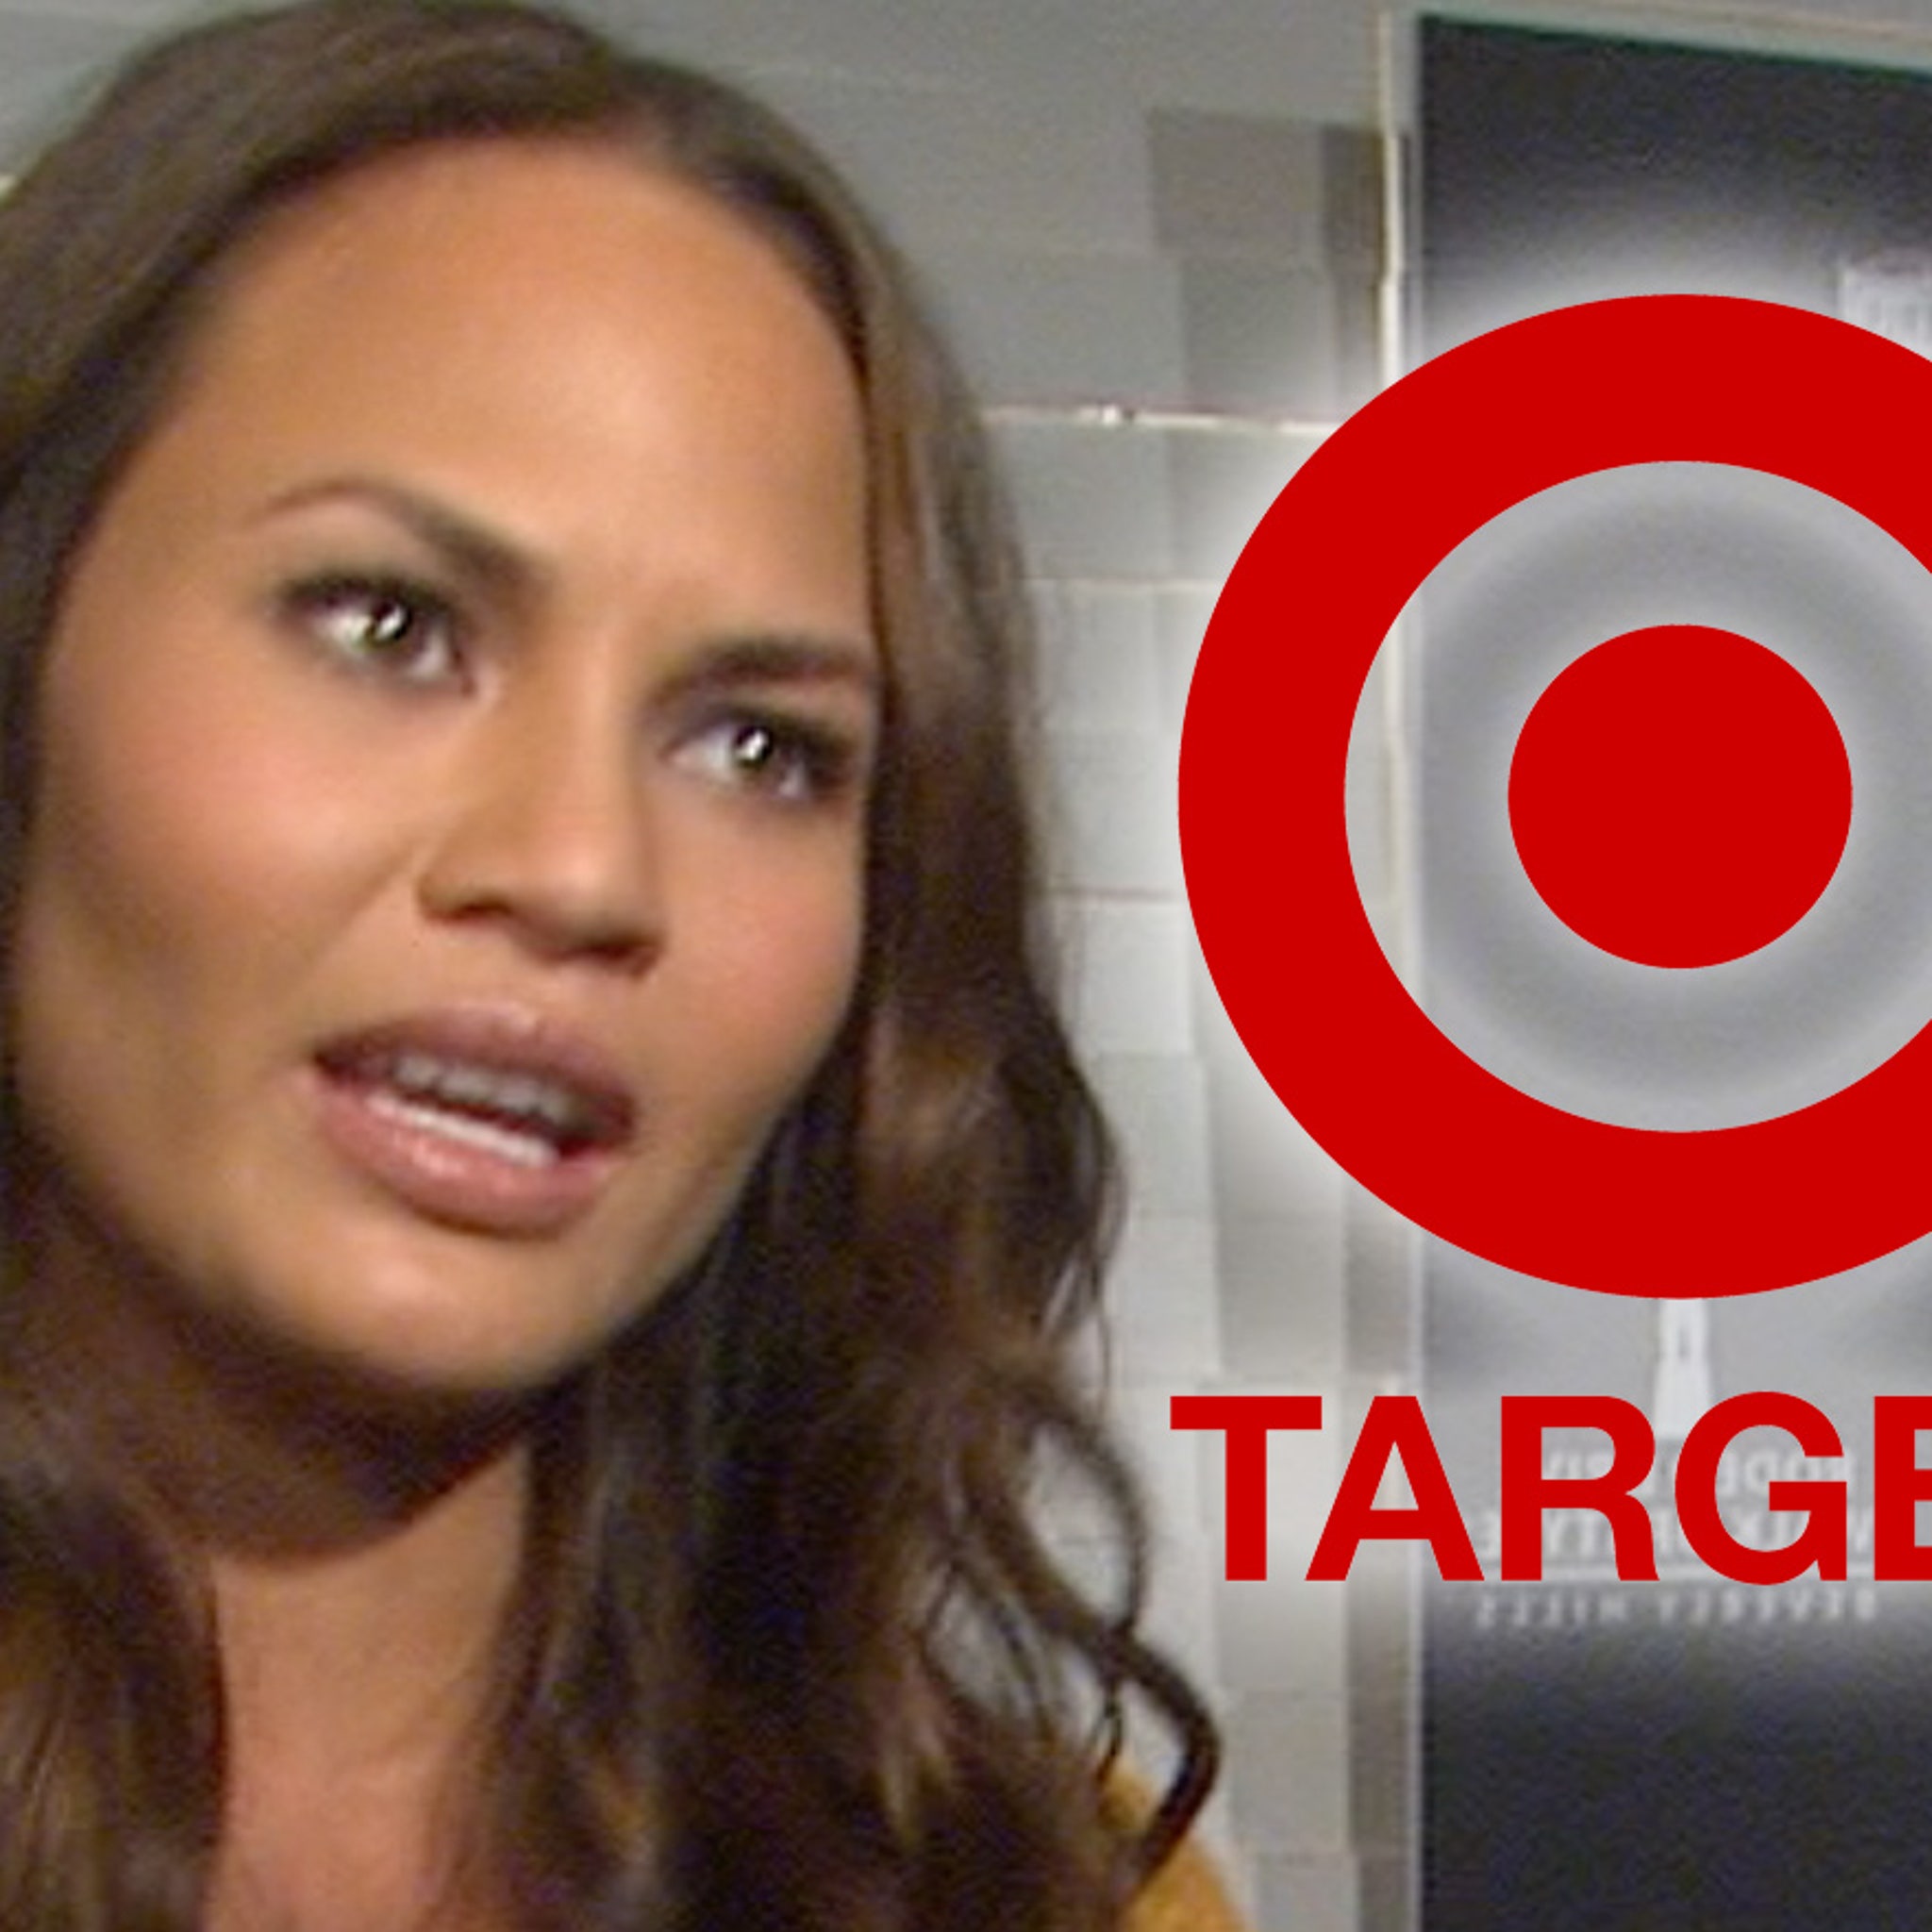 Chrissy Teigen's cookware range removed from Macy's website after